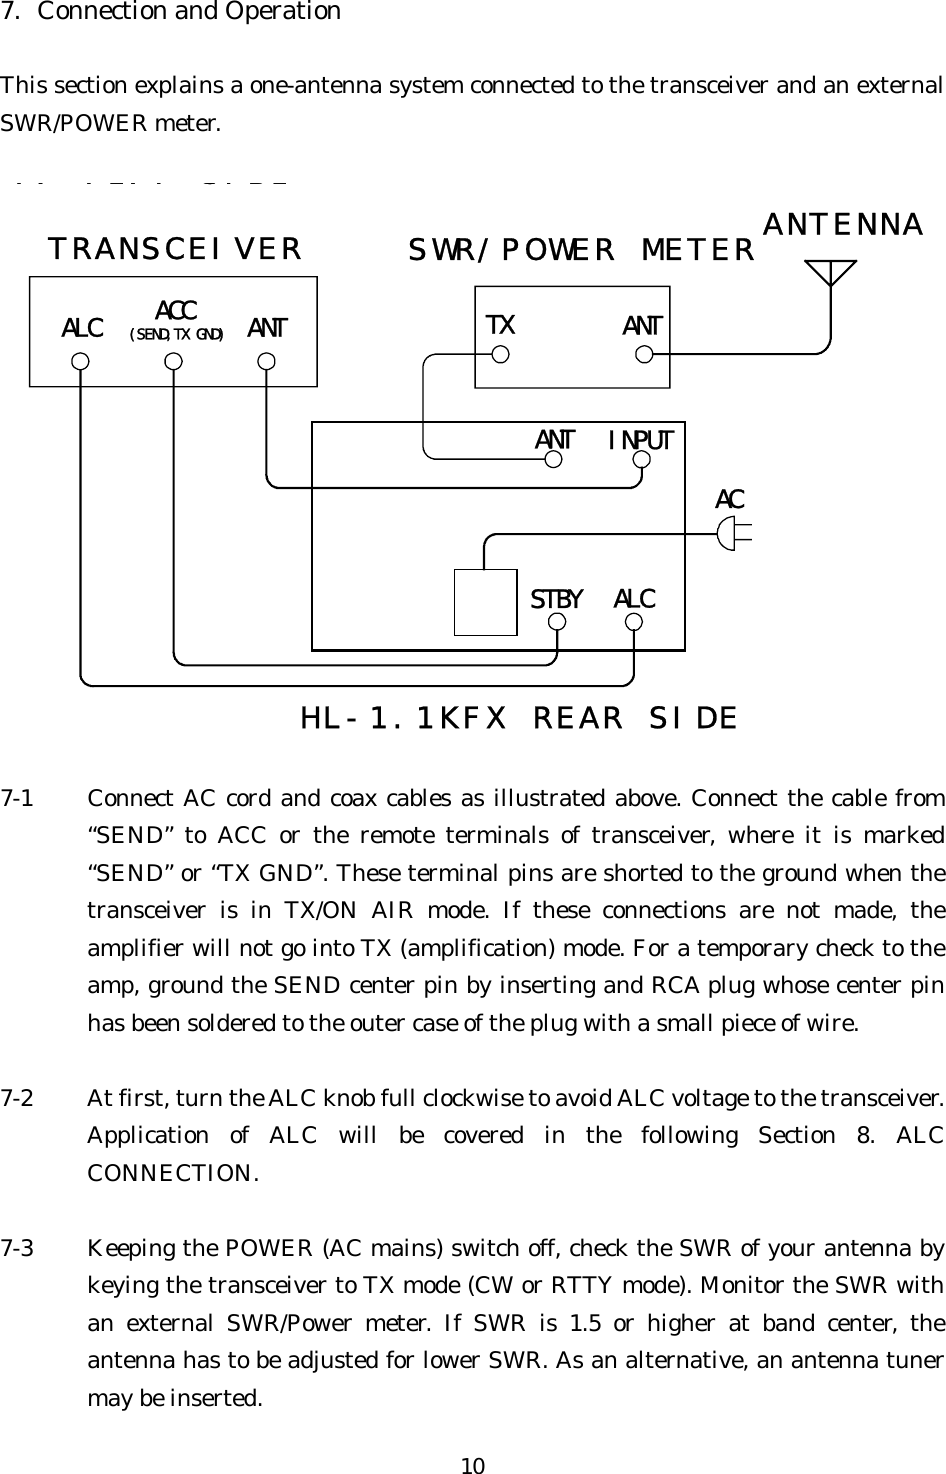 7.  Connection and Operation  This section explains a one-antenna system connected to the transceiver and an external SWR/POWER meter.  ALC ANT(SEND,TX GND)ACCINPUTANTSTBY ALCACTX ANTTRANSCEIVER ANTENNAHL-1.1KFX REAR SIDESWR/POWER METERKFXREARSIDEKFXREARSIDE  7-1  Connect AC cord and coax cables as illustrated above. Connect the cable from “SEND” to ACC or the remote terminals of transceiver, where it is marked “SEND” or “TX GND”. These terminal pins are shorted to the ground when the transceiver is in TX/ON AIR mode. If these connections are not made, the amplifier will not go into TX (amplification) mode. For a temporary check to the amp, ground the SEND center pin by inserting and RCA plug whose center pin has been soldered to the outer case of the plug with a small piece of wire.  7-2  At first, turn the ALC knob full clockwise to avoid ALC voltage to the transceiver. Application of ALC will be covered in the following Section 8. ALC CONNECTION.  7-3  Keeping the POWER (AC mains) switch off, check the SWR of your antenna by keying the transceiver to TX mode (CW or RTTY mode). Monitor the SWR with an external SWR/Power meter. If SWR is 1.5 or higher at band center, the antenna has to be adjusted for lower SWR. As an alternative, an antenna tuner may be inserted. 10 